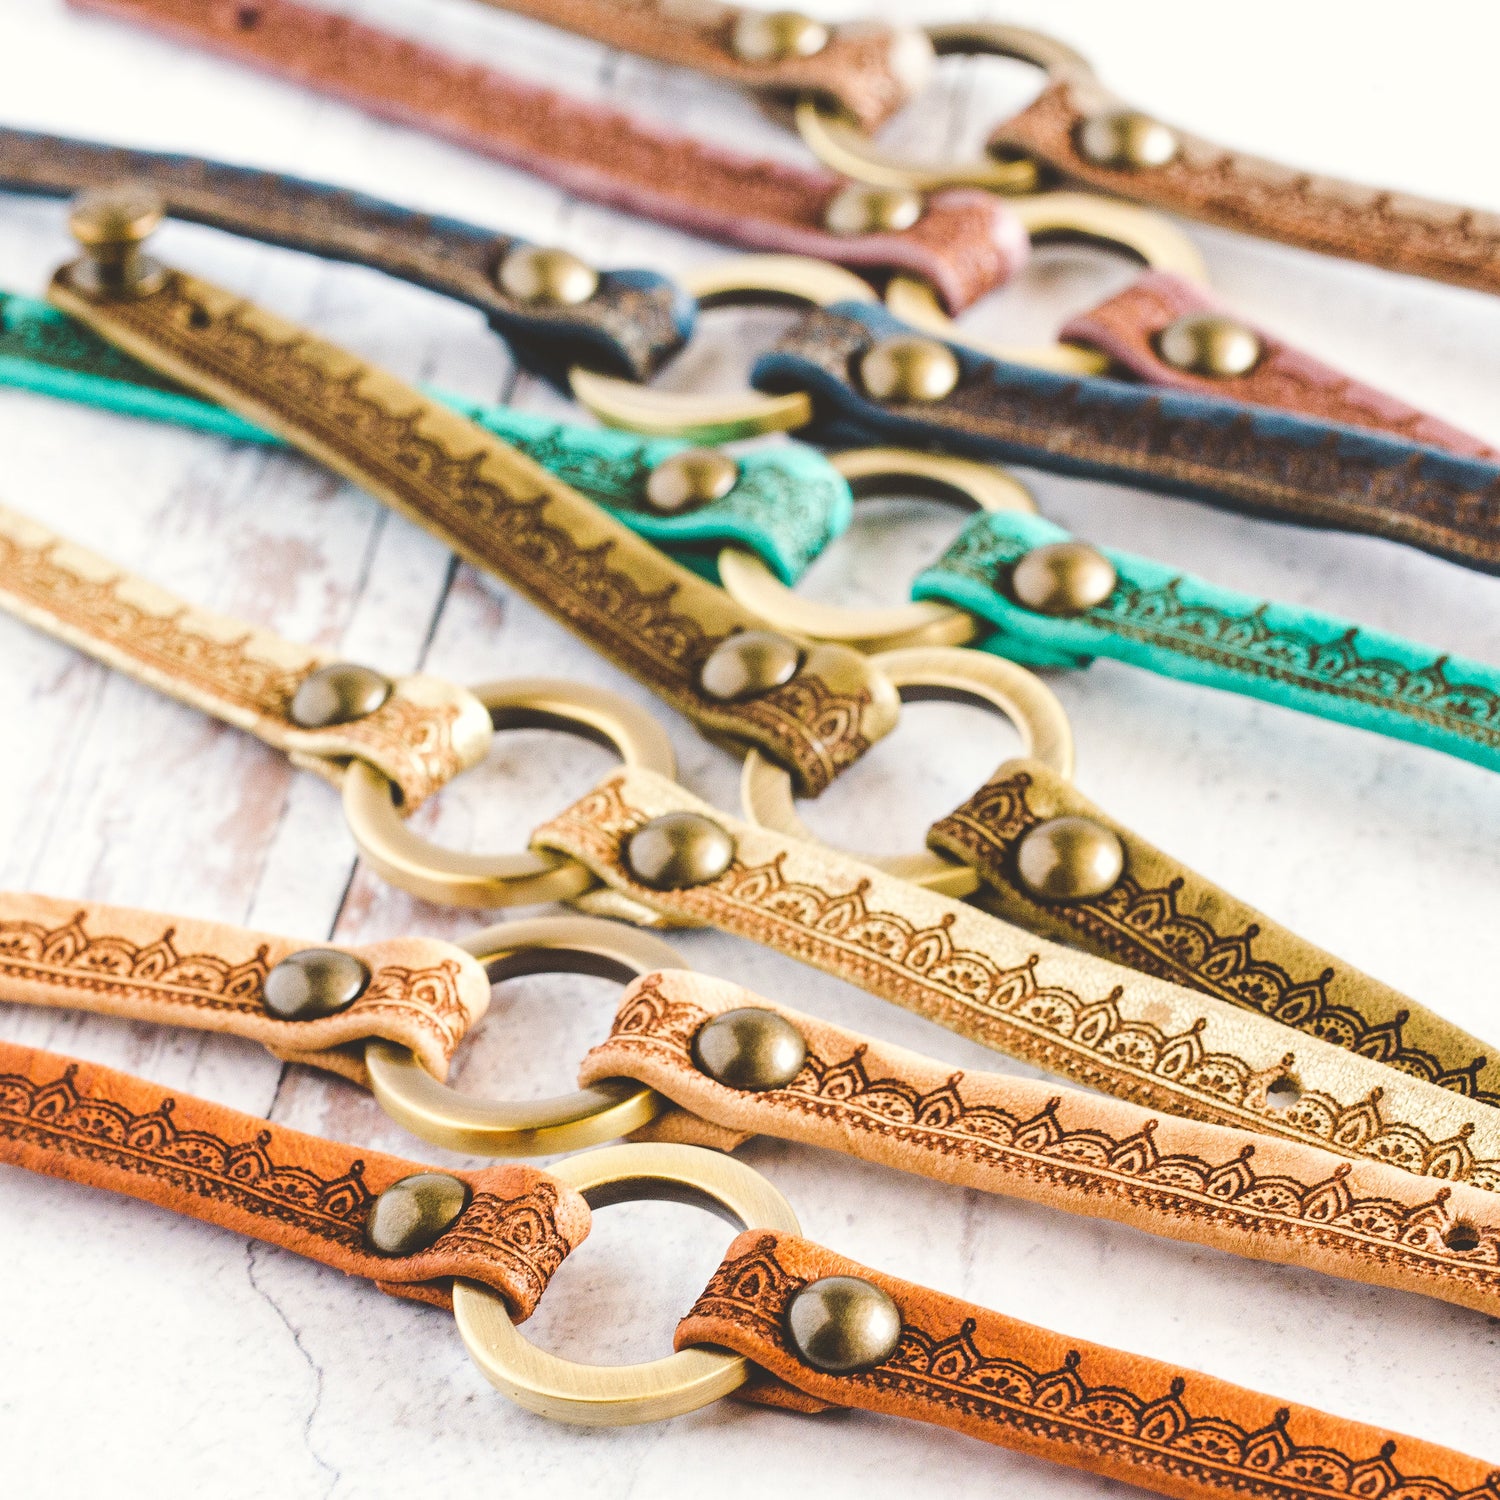 Group shot of leather bracelets with henna print